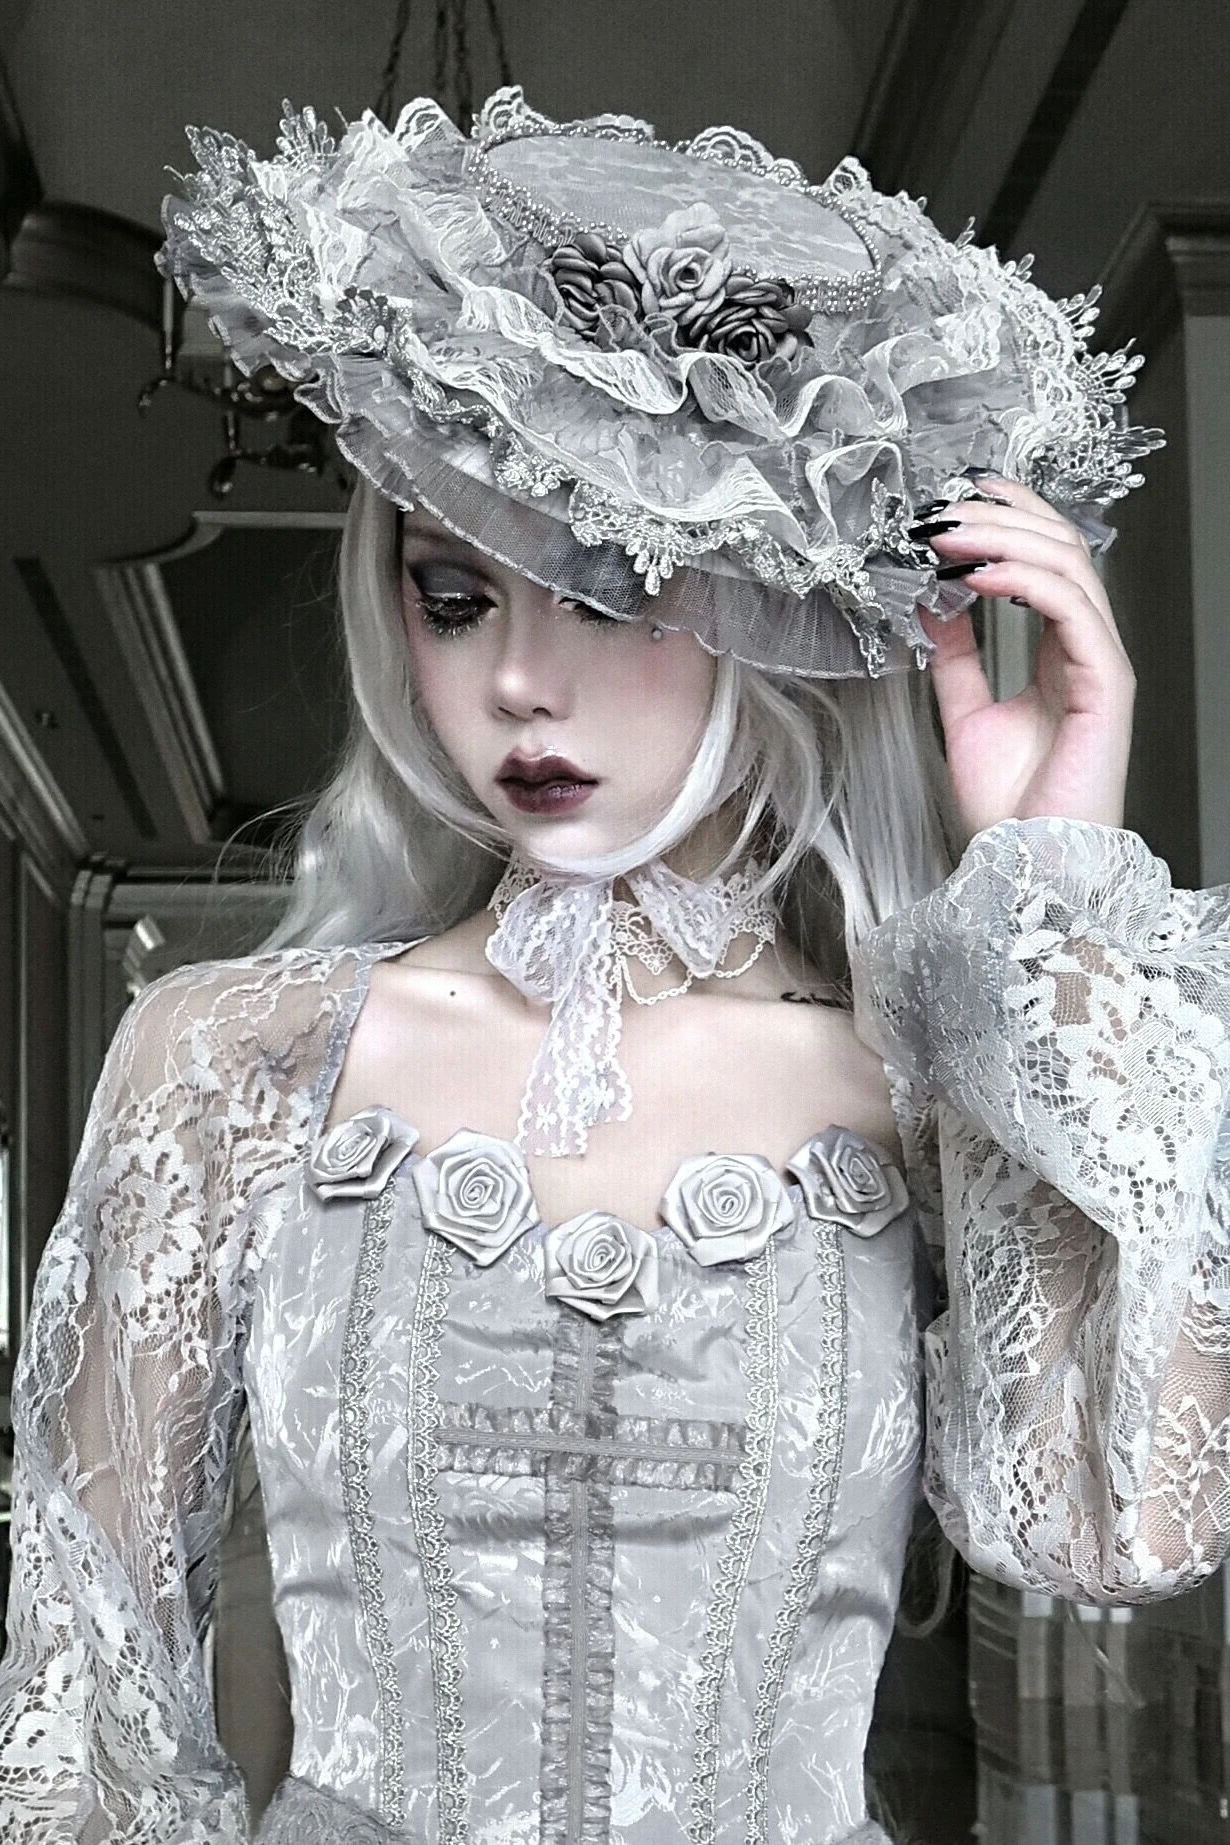 Original Rose Funeral White Gothic Dirty Lace Palace Lolita Rose Fedoras Noverty Lace Hat Women images - 6